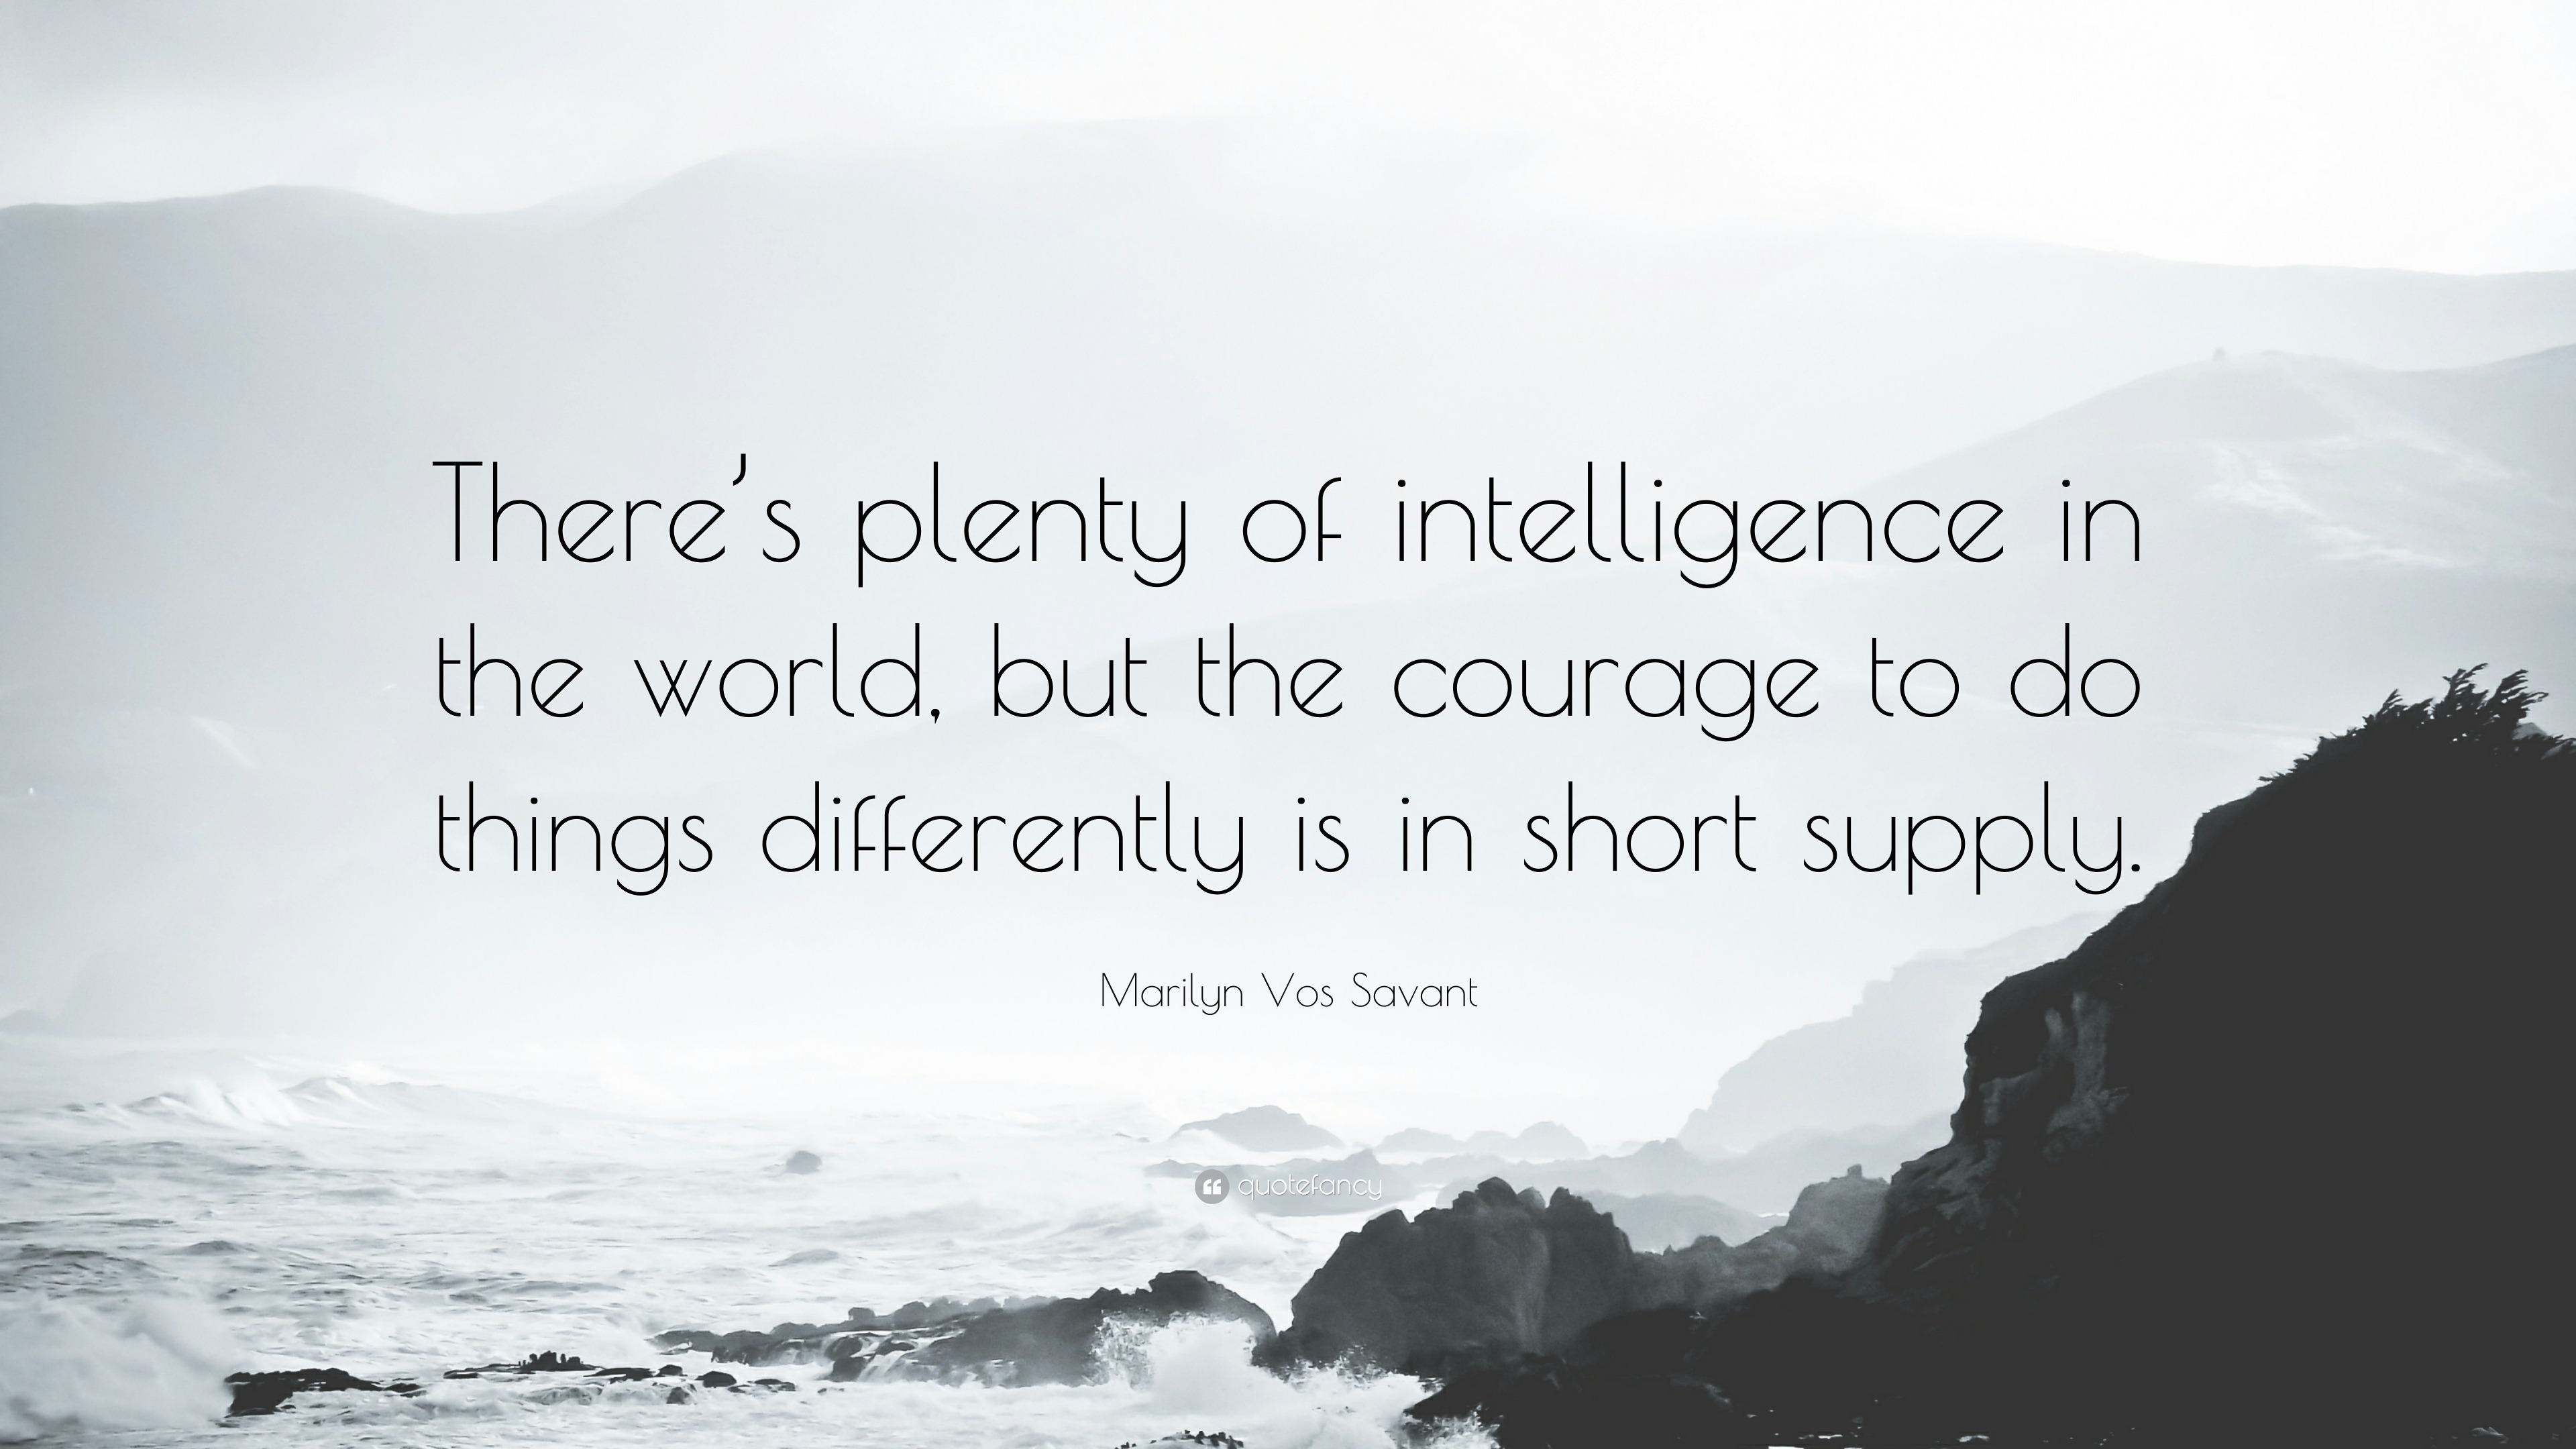 Marilyn Vos Savant Quote: “There’s plenty of intelligence in the world ...